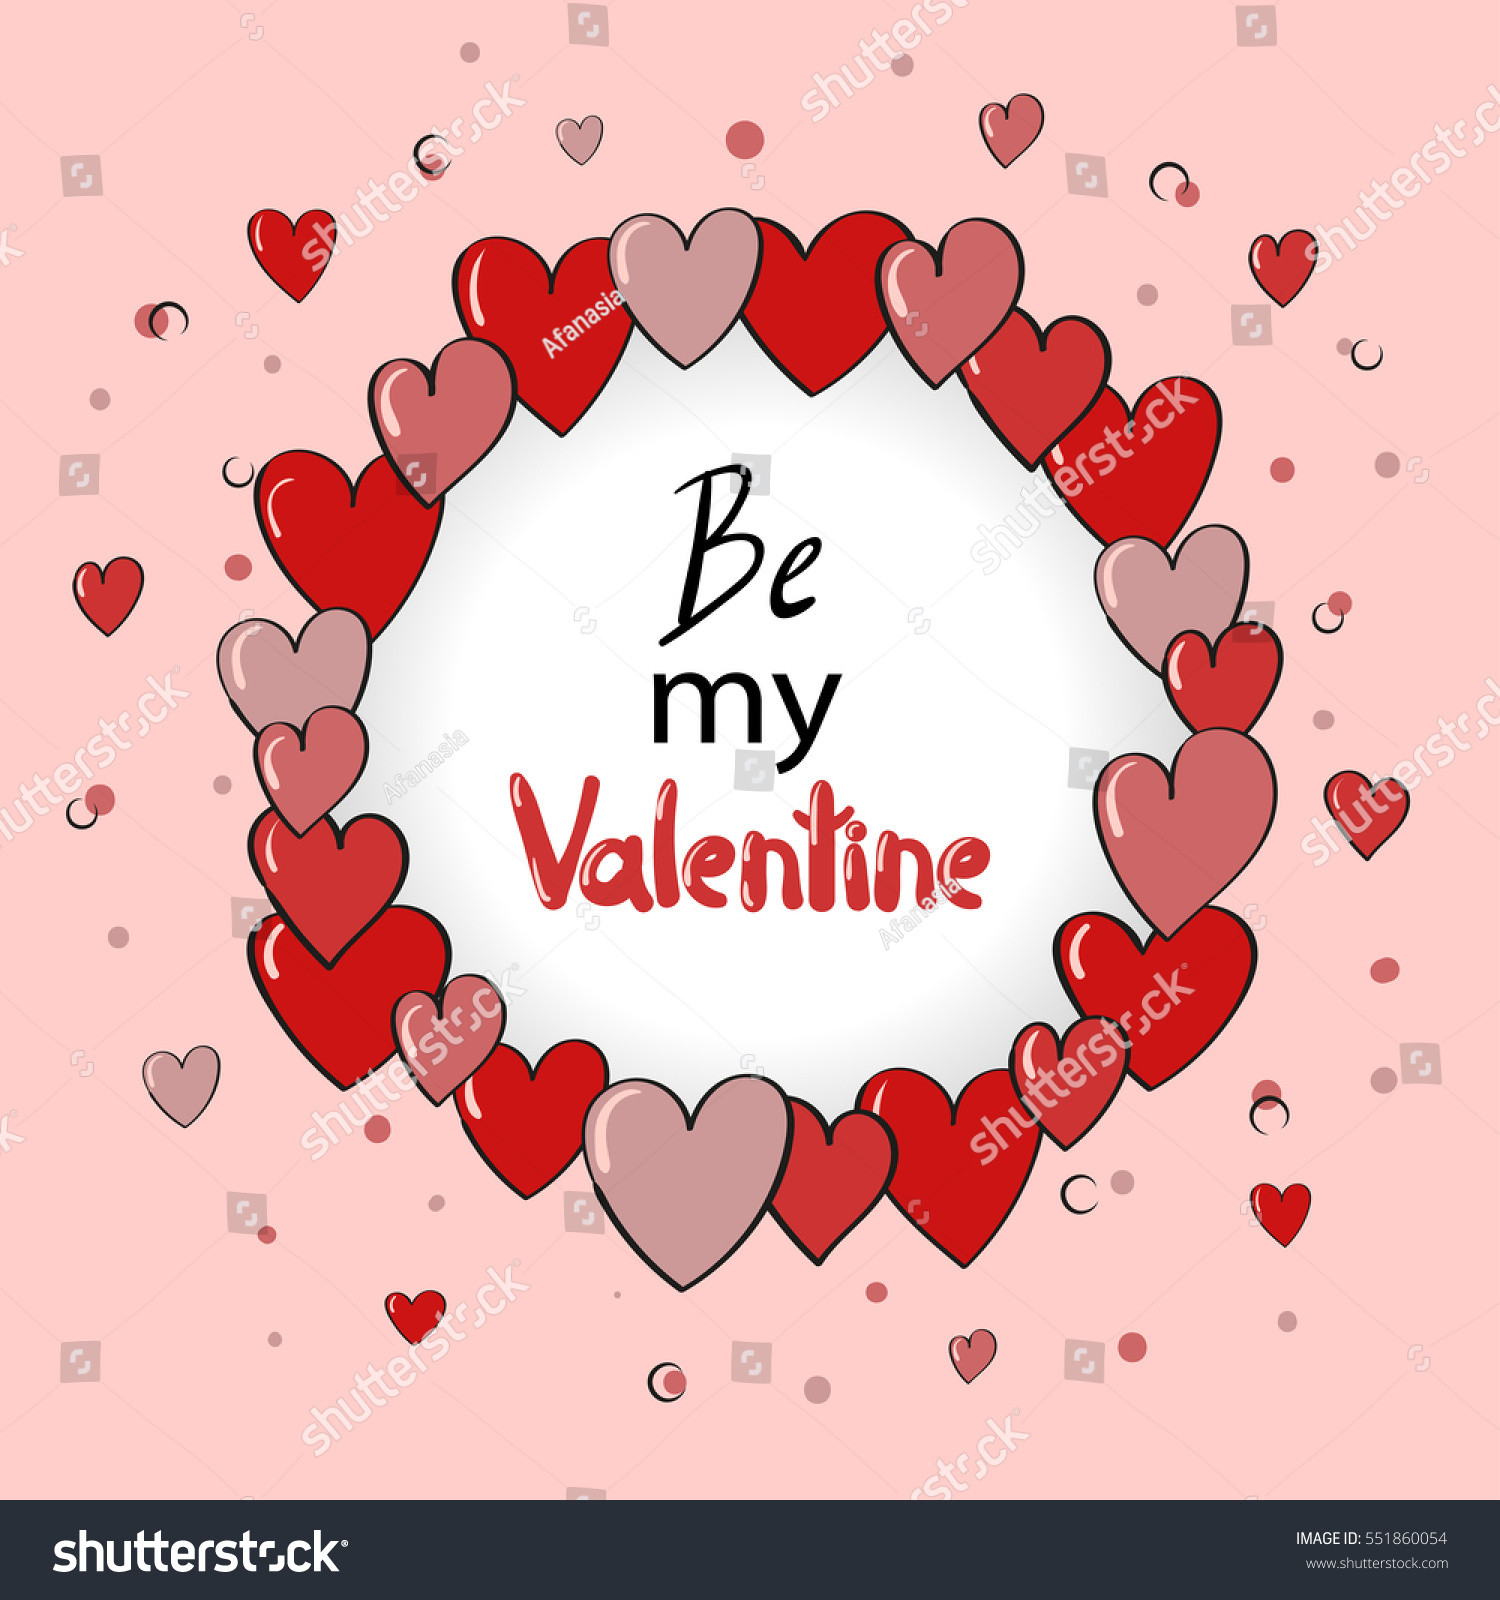 Valentines Day Card Design
 Valentines Day Card Design Hearts Vector Stock Vector